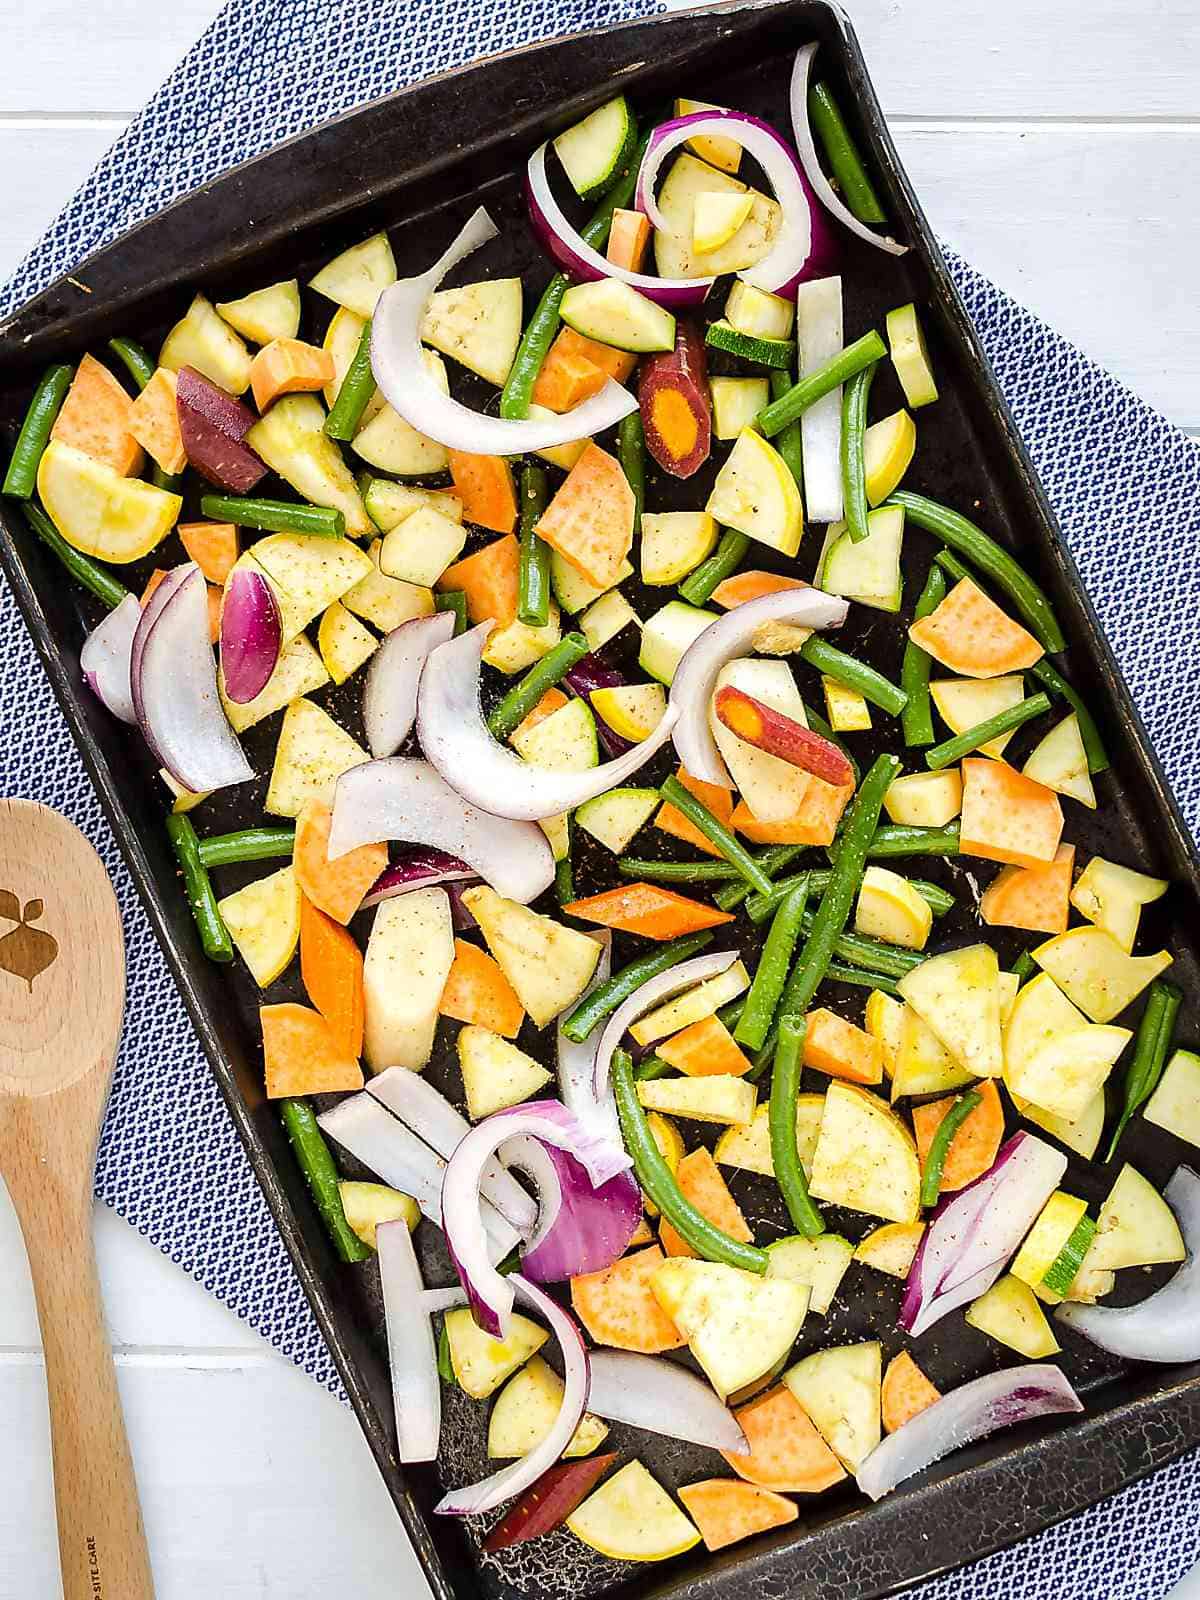 sheet pan full of cut up raw colorful vegetables with a wooden spoon on the side